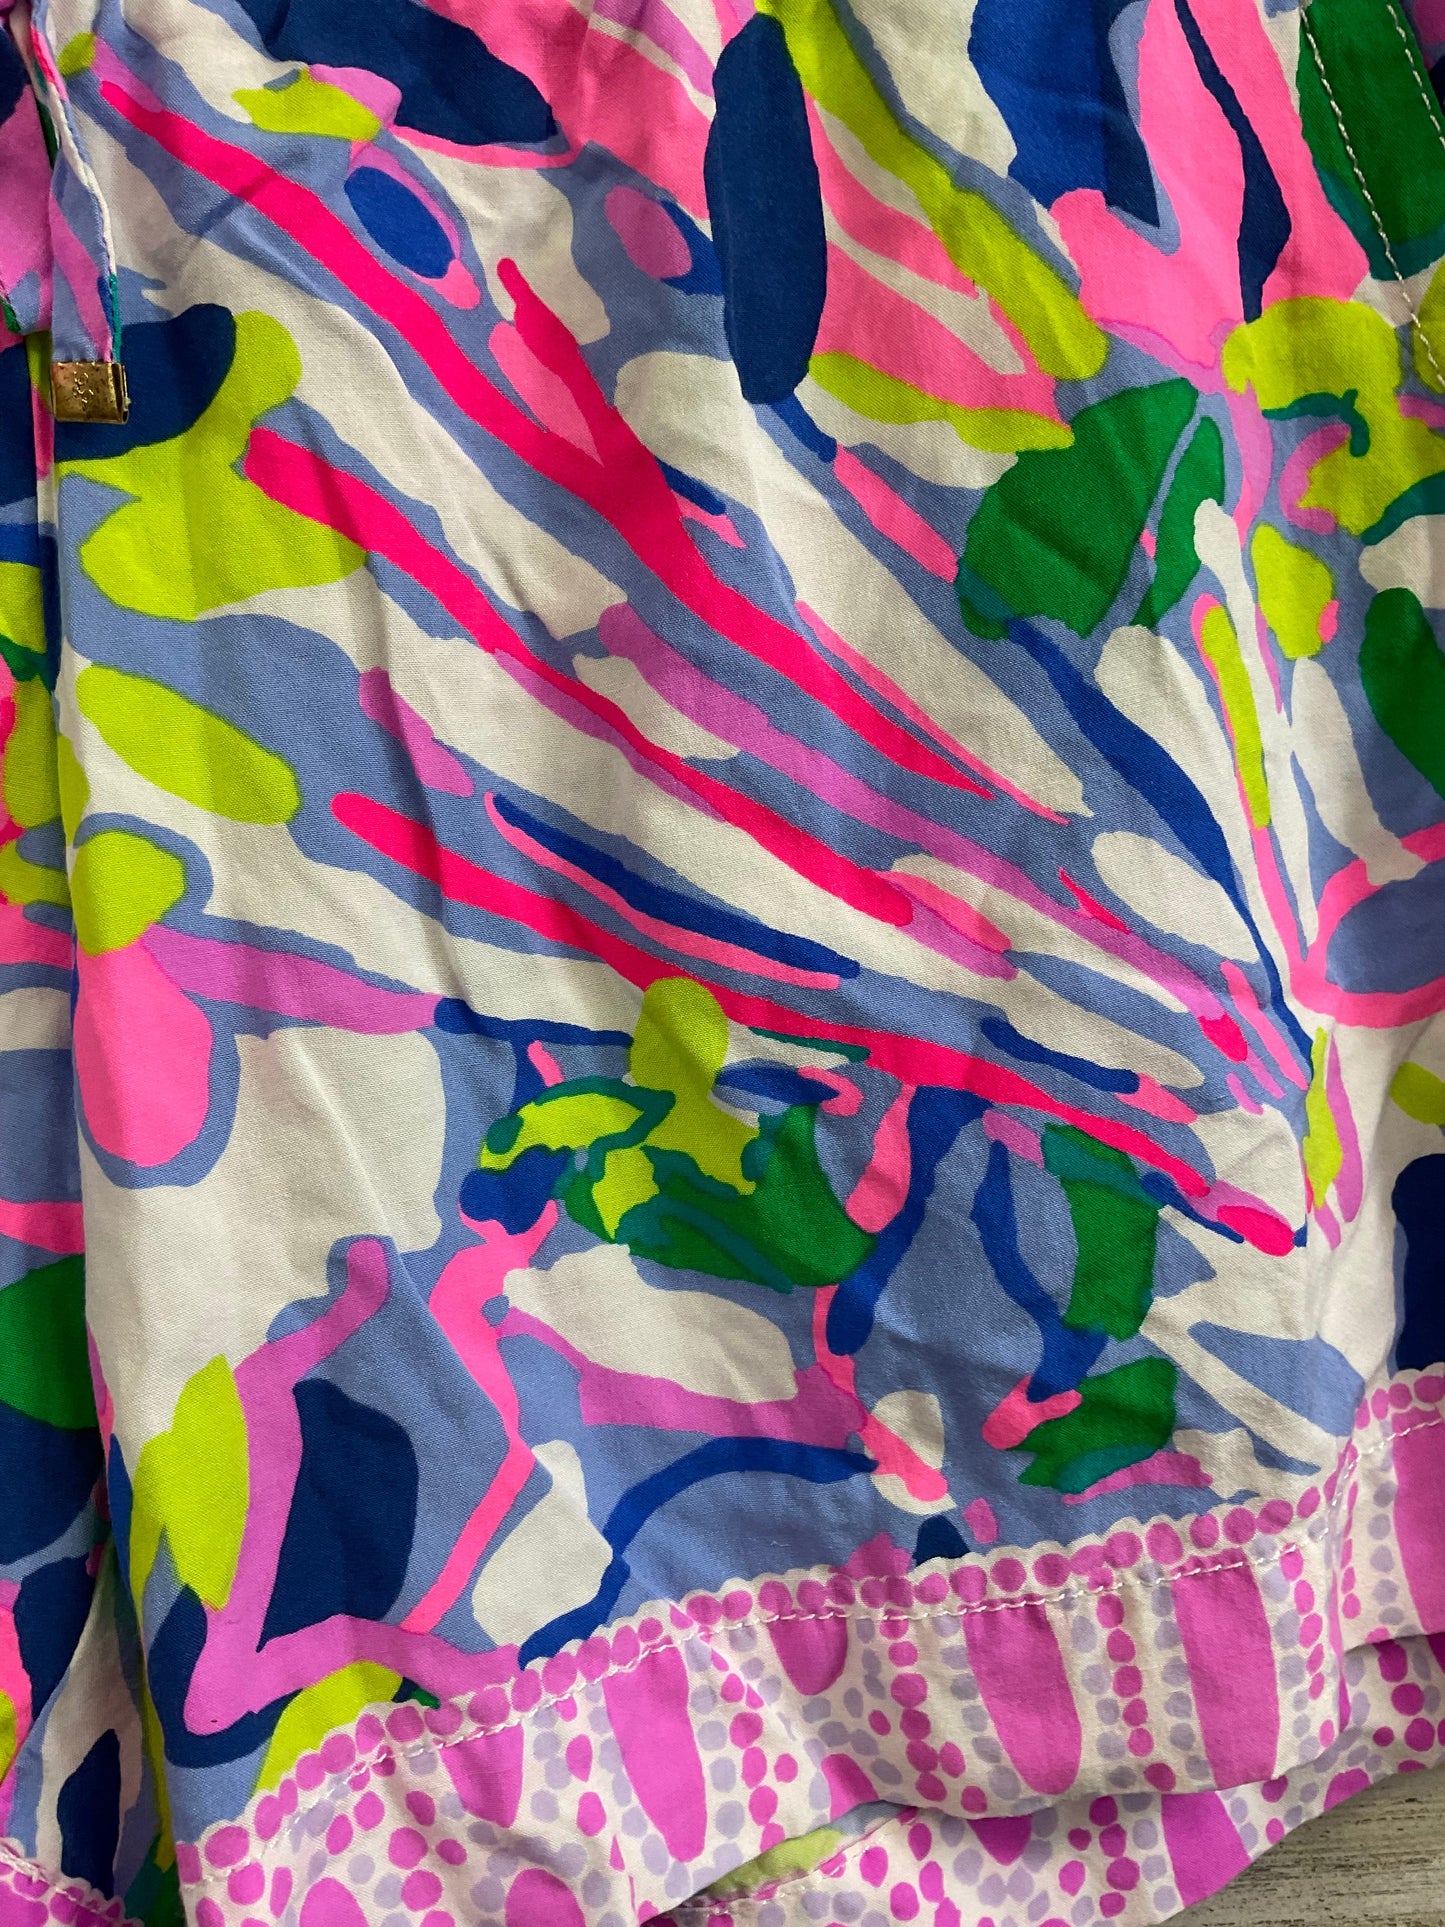 Purple Shorts Lilly Pulitzer, Size S